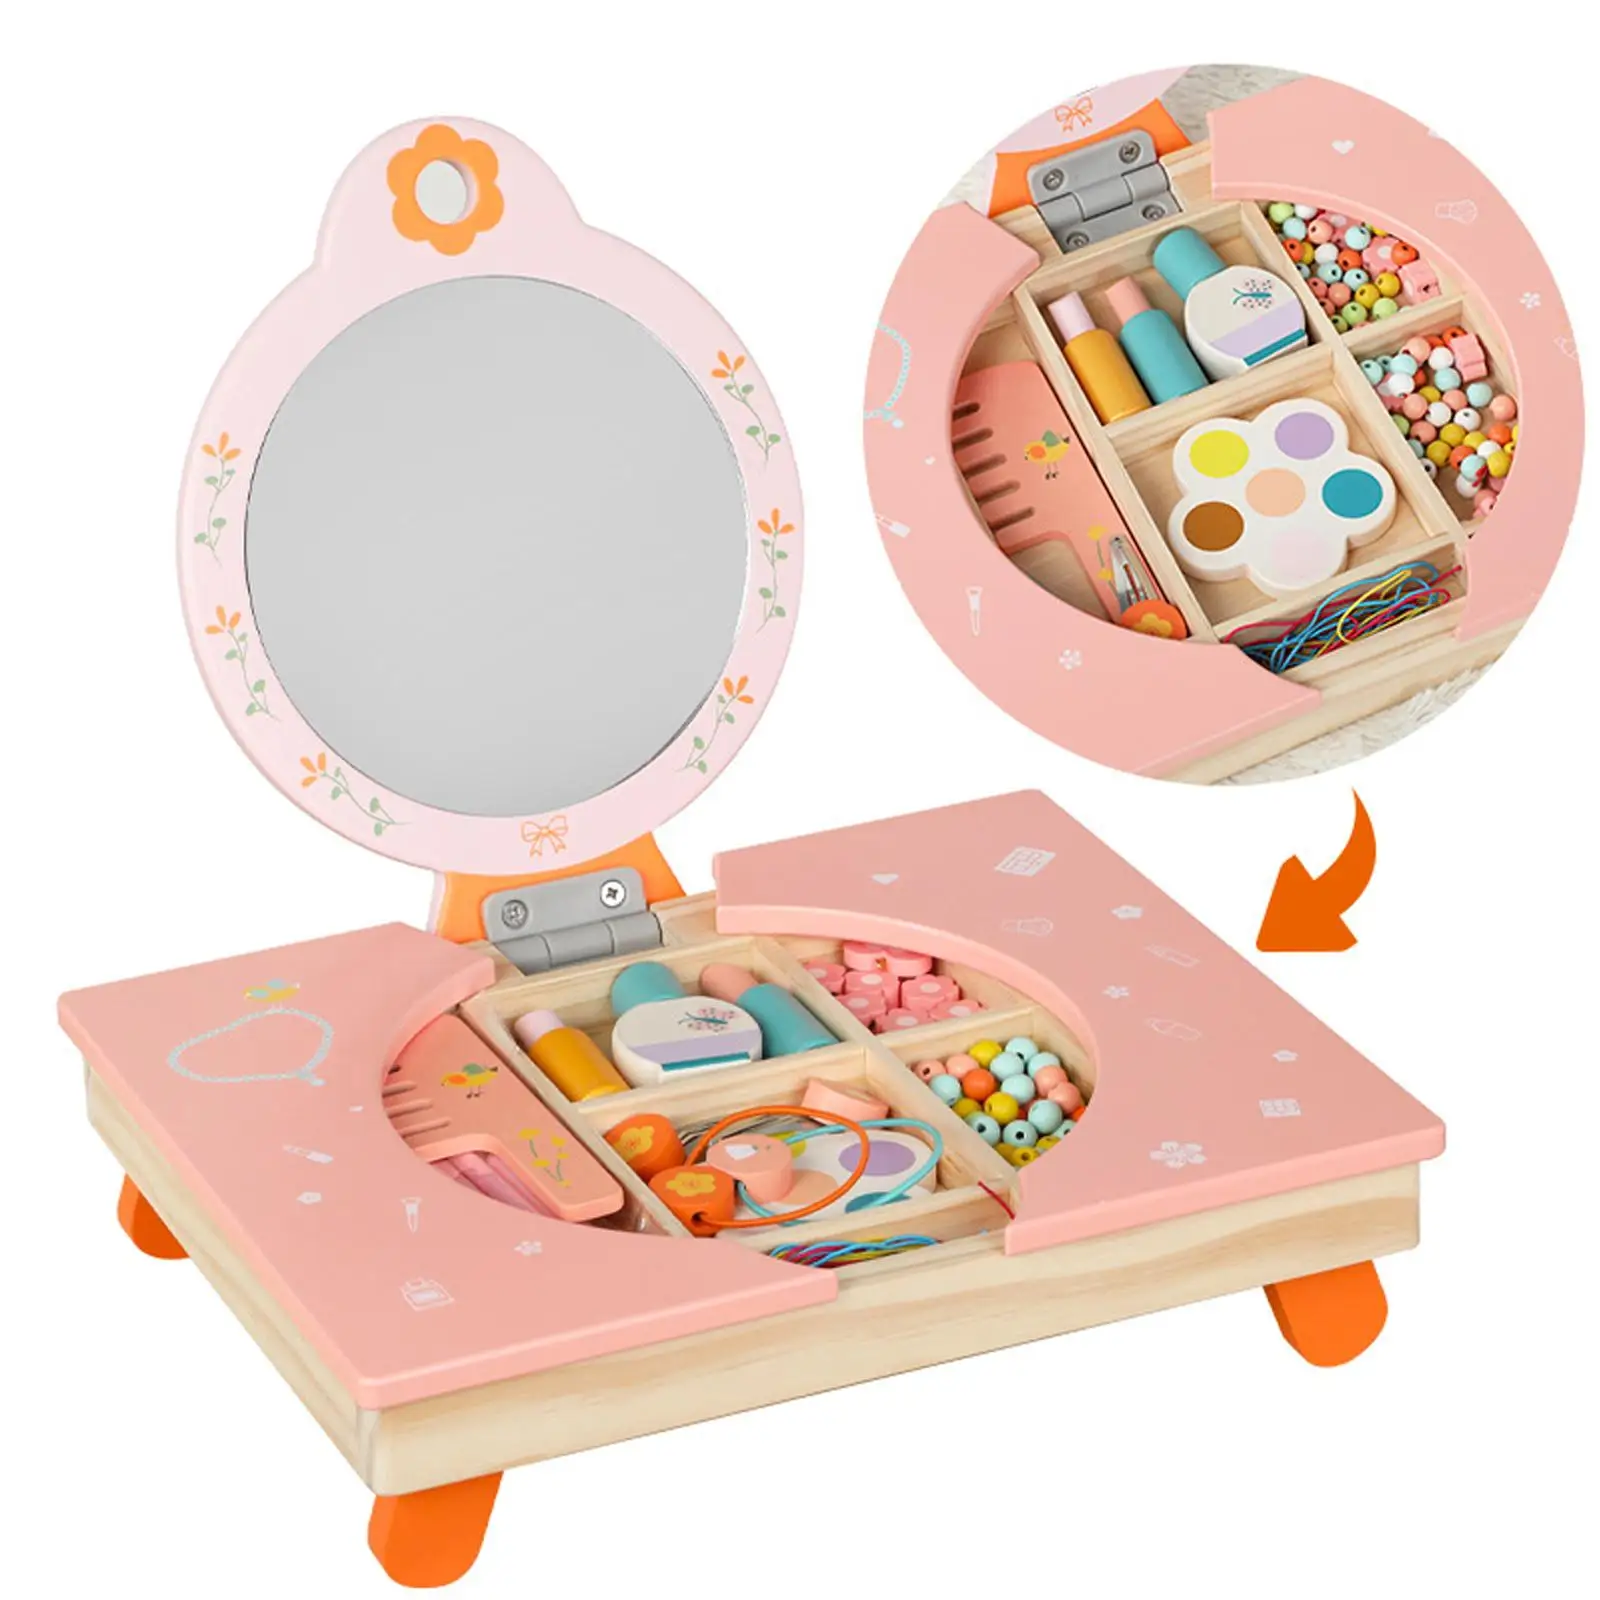 Tabletop Pretend Play Vanity Toy Playset Folding Dresser Toy Early Learning Educational Toys Kids Makeup Vanity Toy for Toddlers